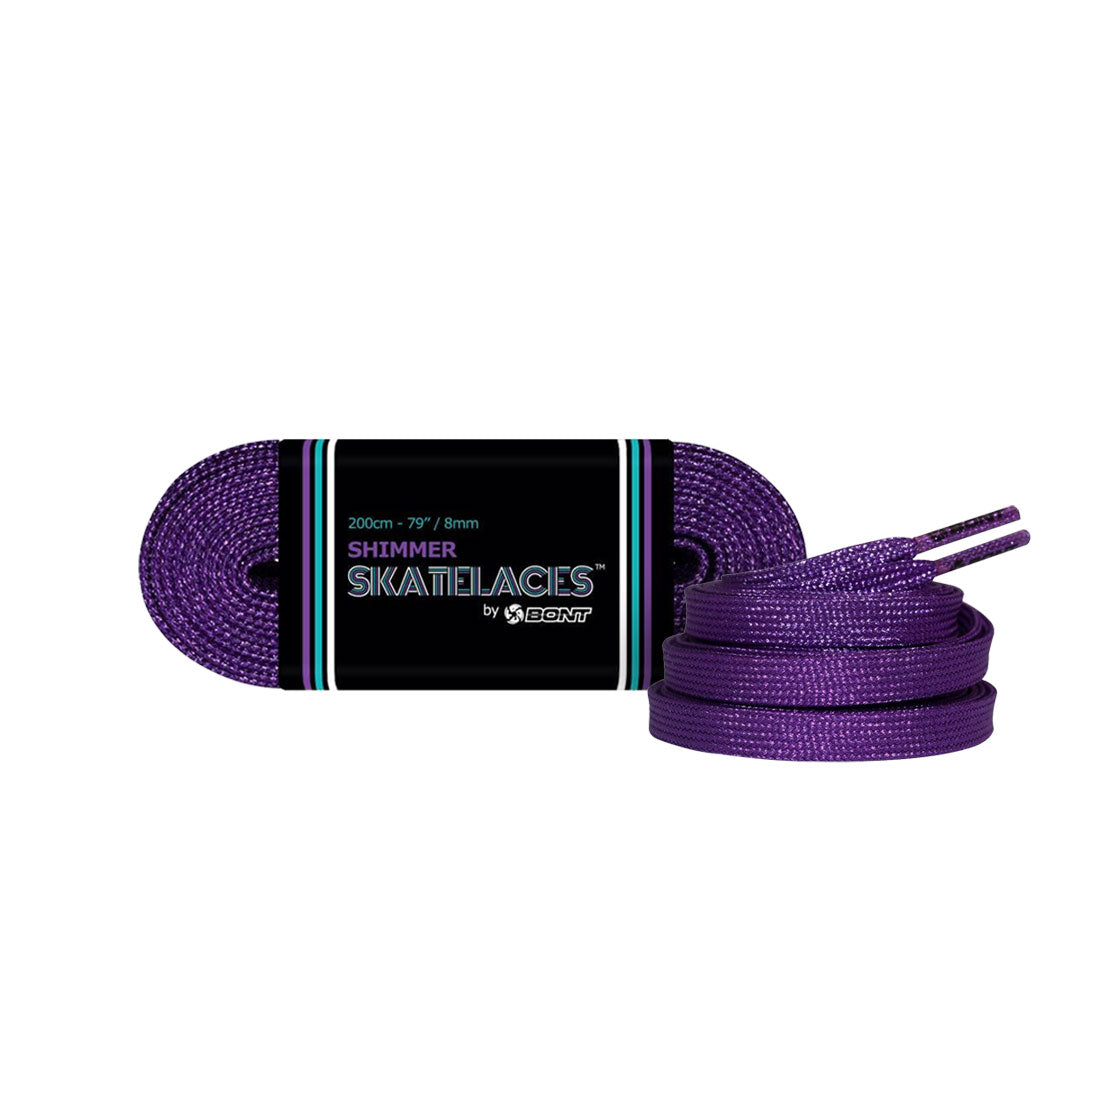 Bont Shimmer 8mm Laces - 200cm/79in Smoked Amethyst Laces